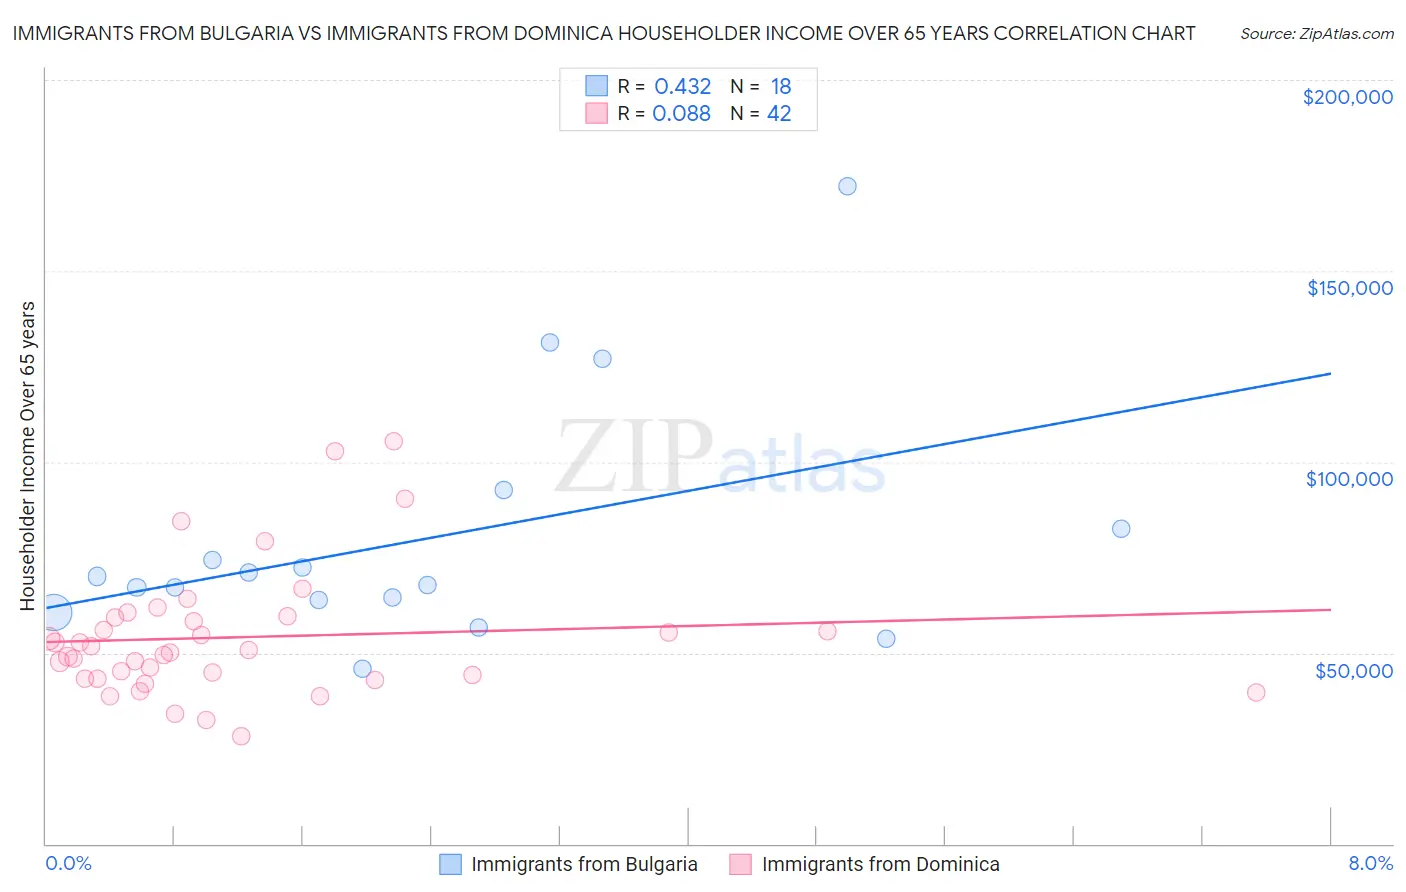 Immigrants from Bulgaria vs Immigrants from Dominica Householder Income Over 65 years